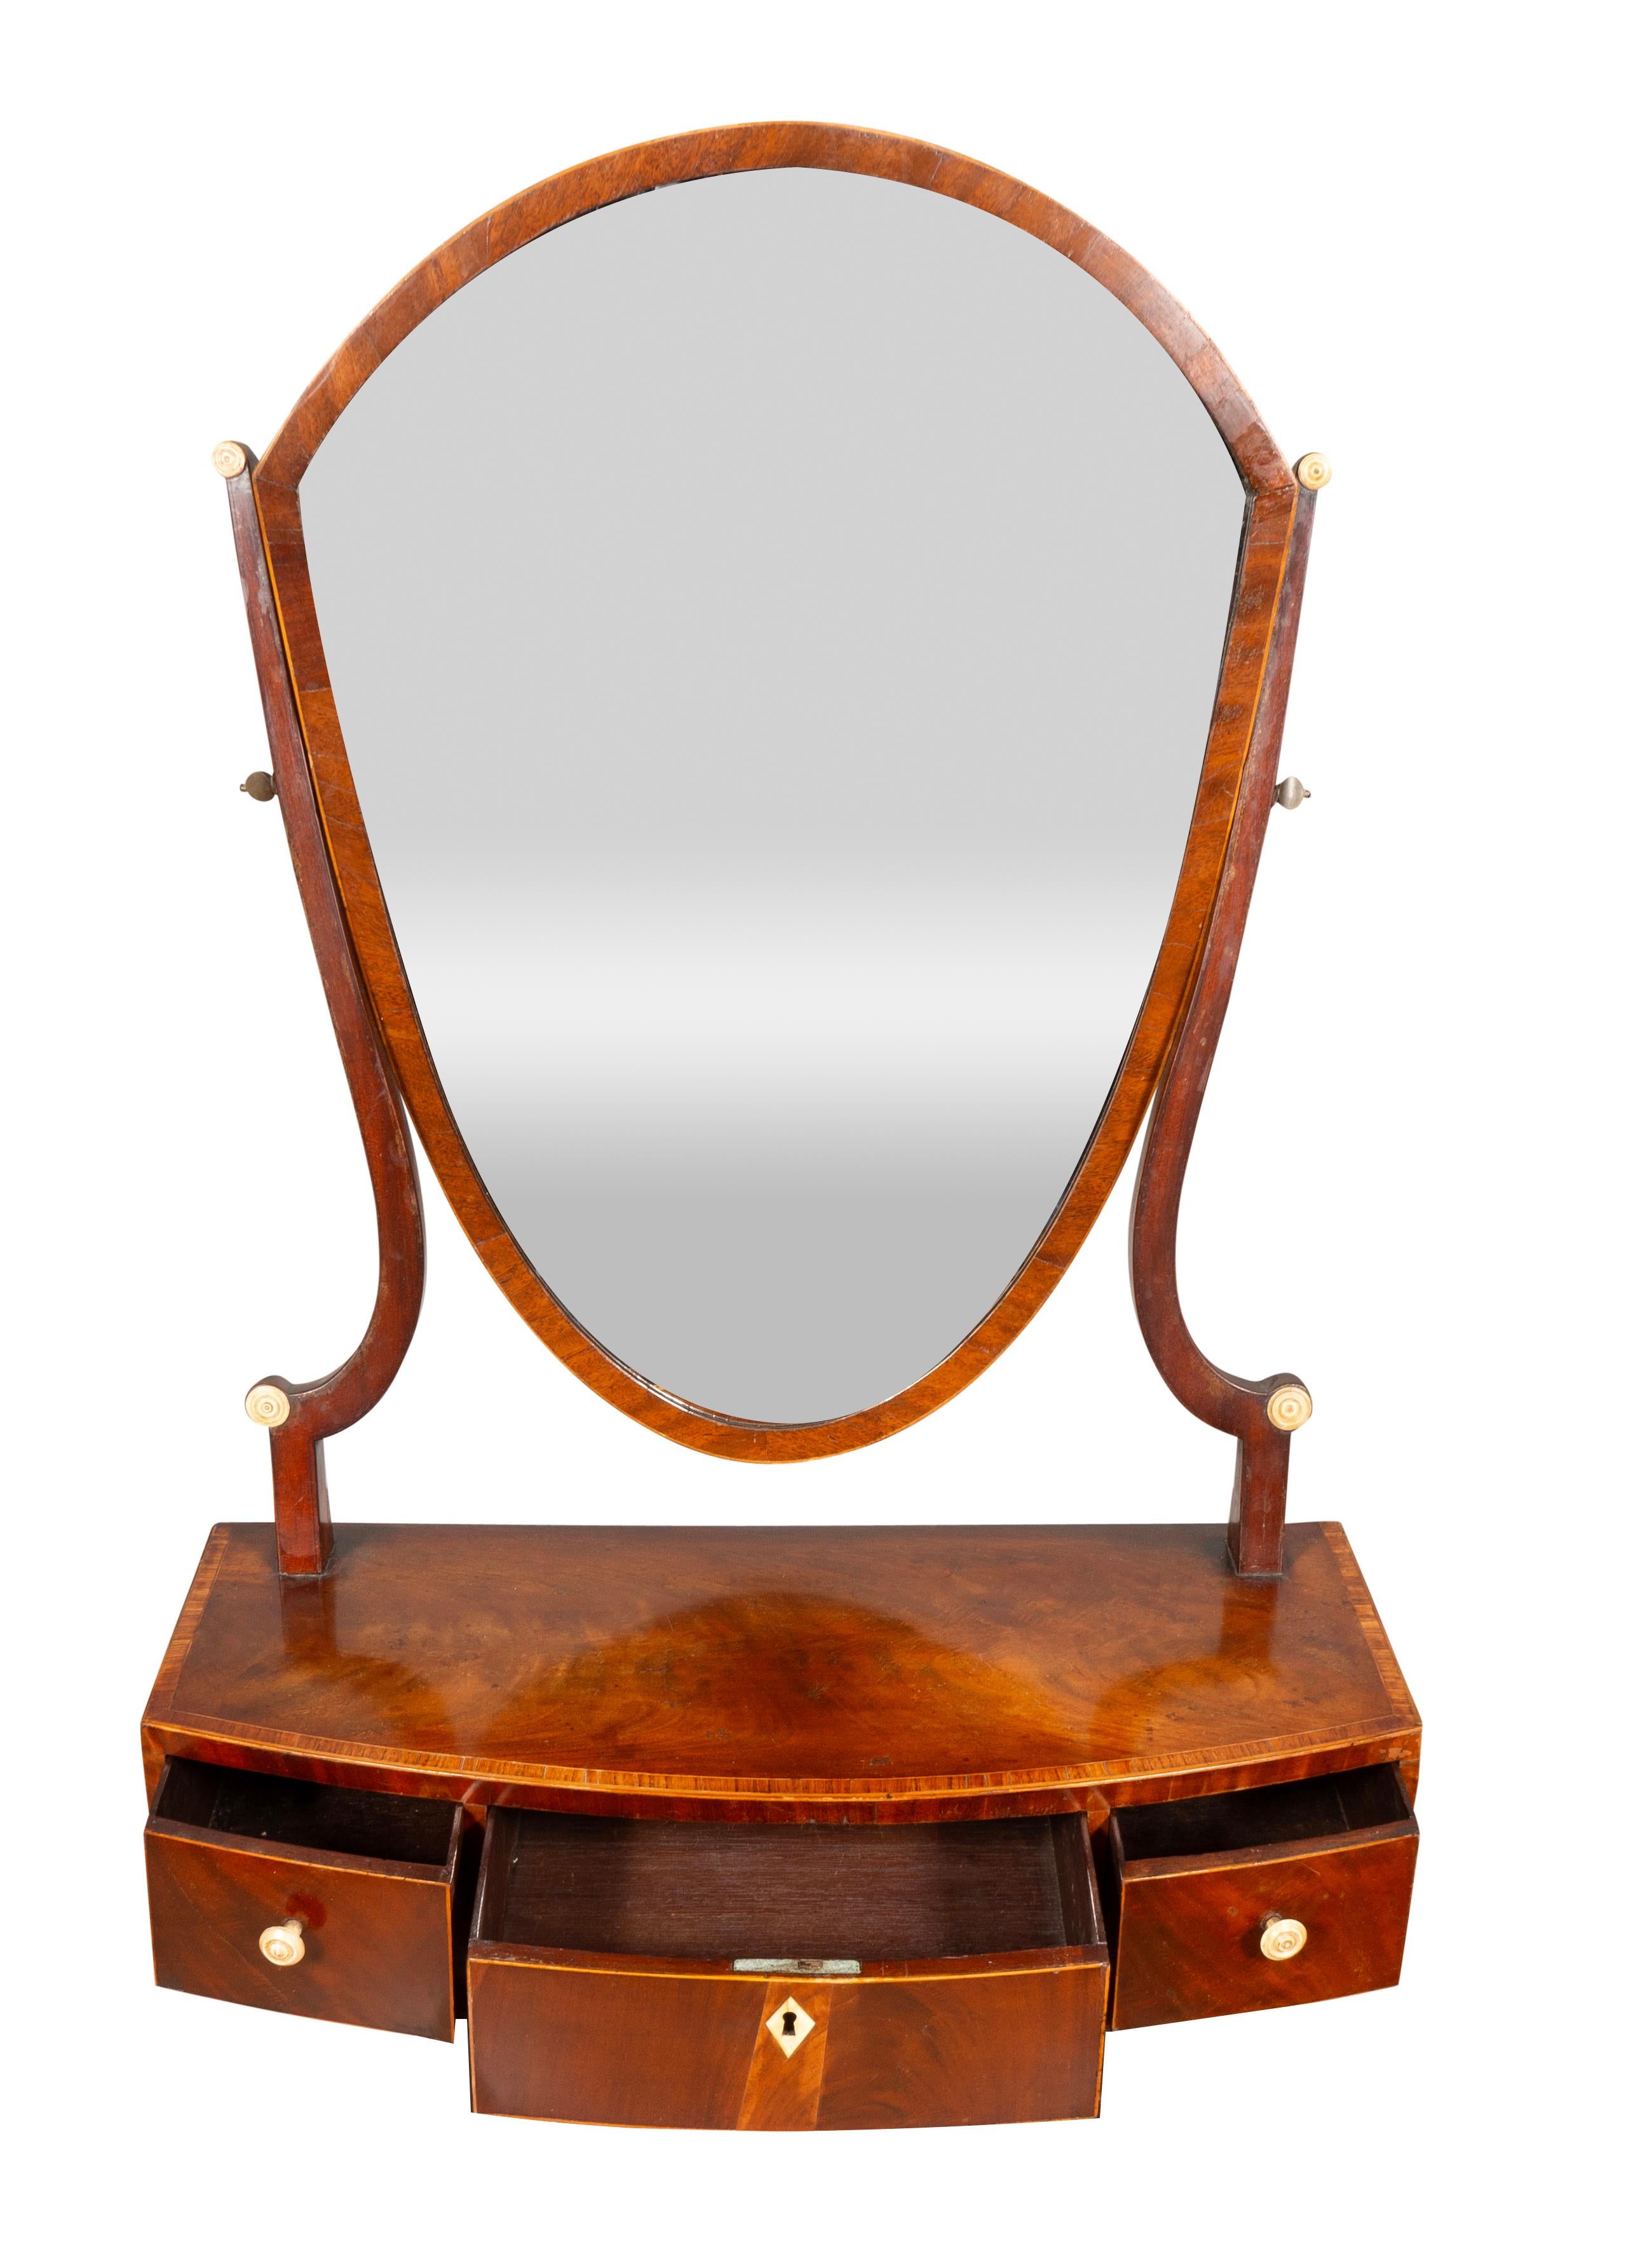 With a shield shape mirror with two supports to enable adjustment. The bow front cross banded  base with drawers. Ball feet. Typically a bedroom piece to place on a chest of drawers.